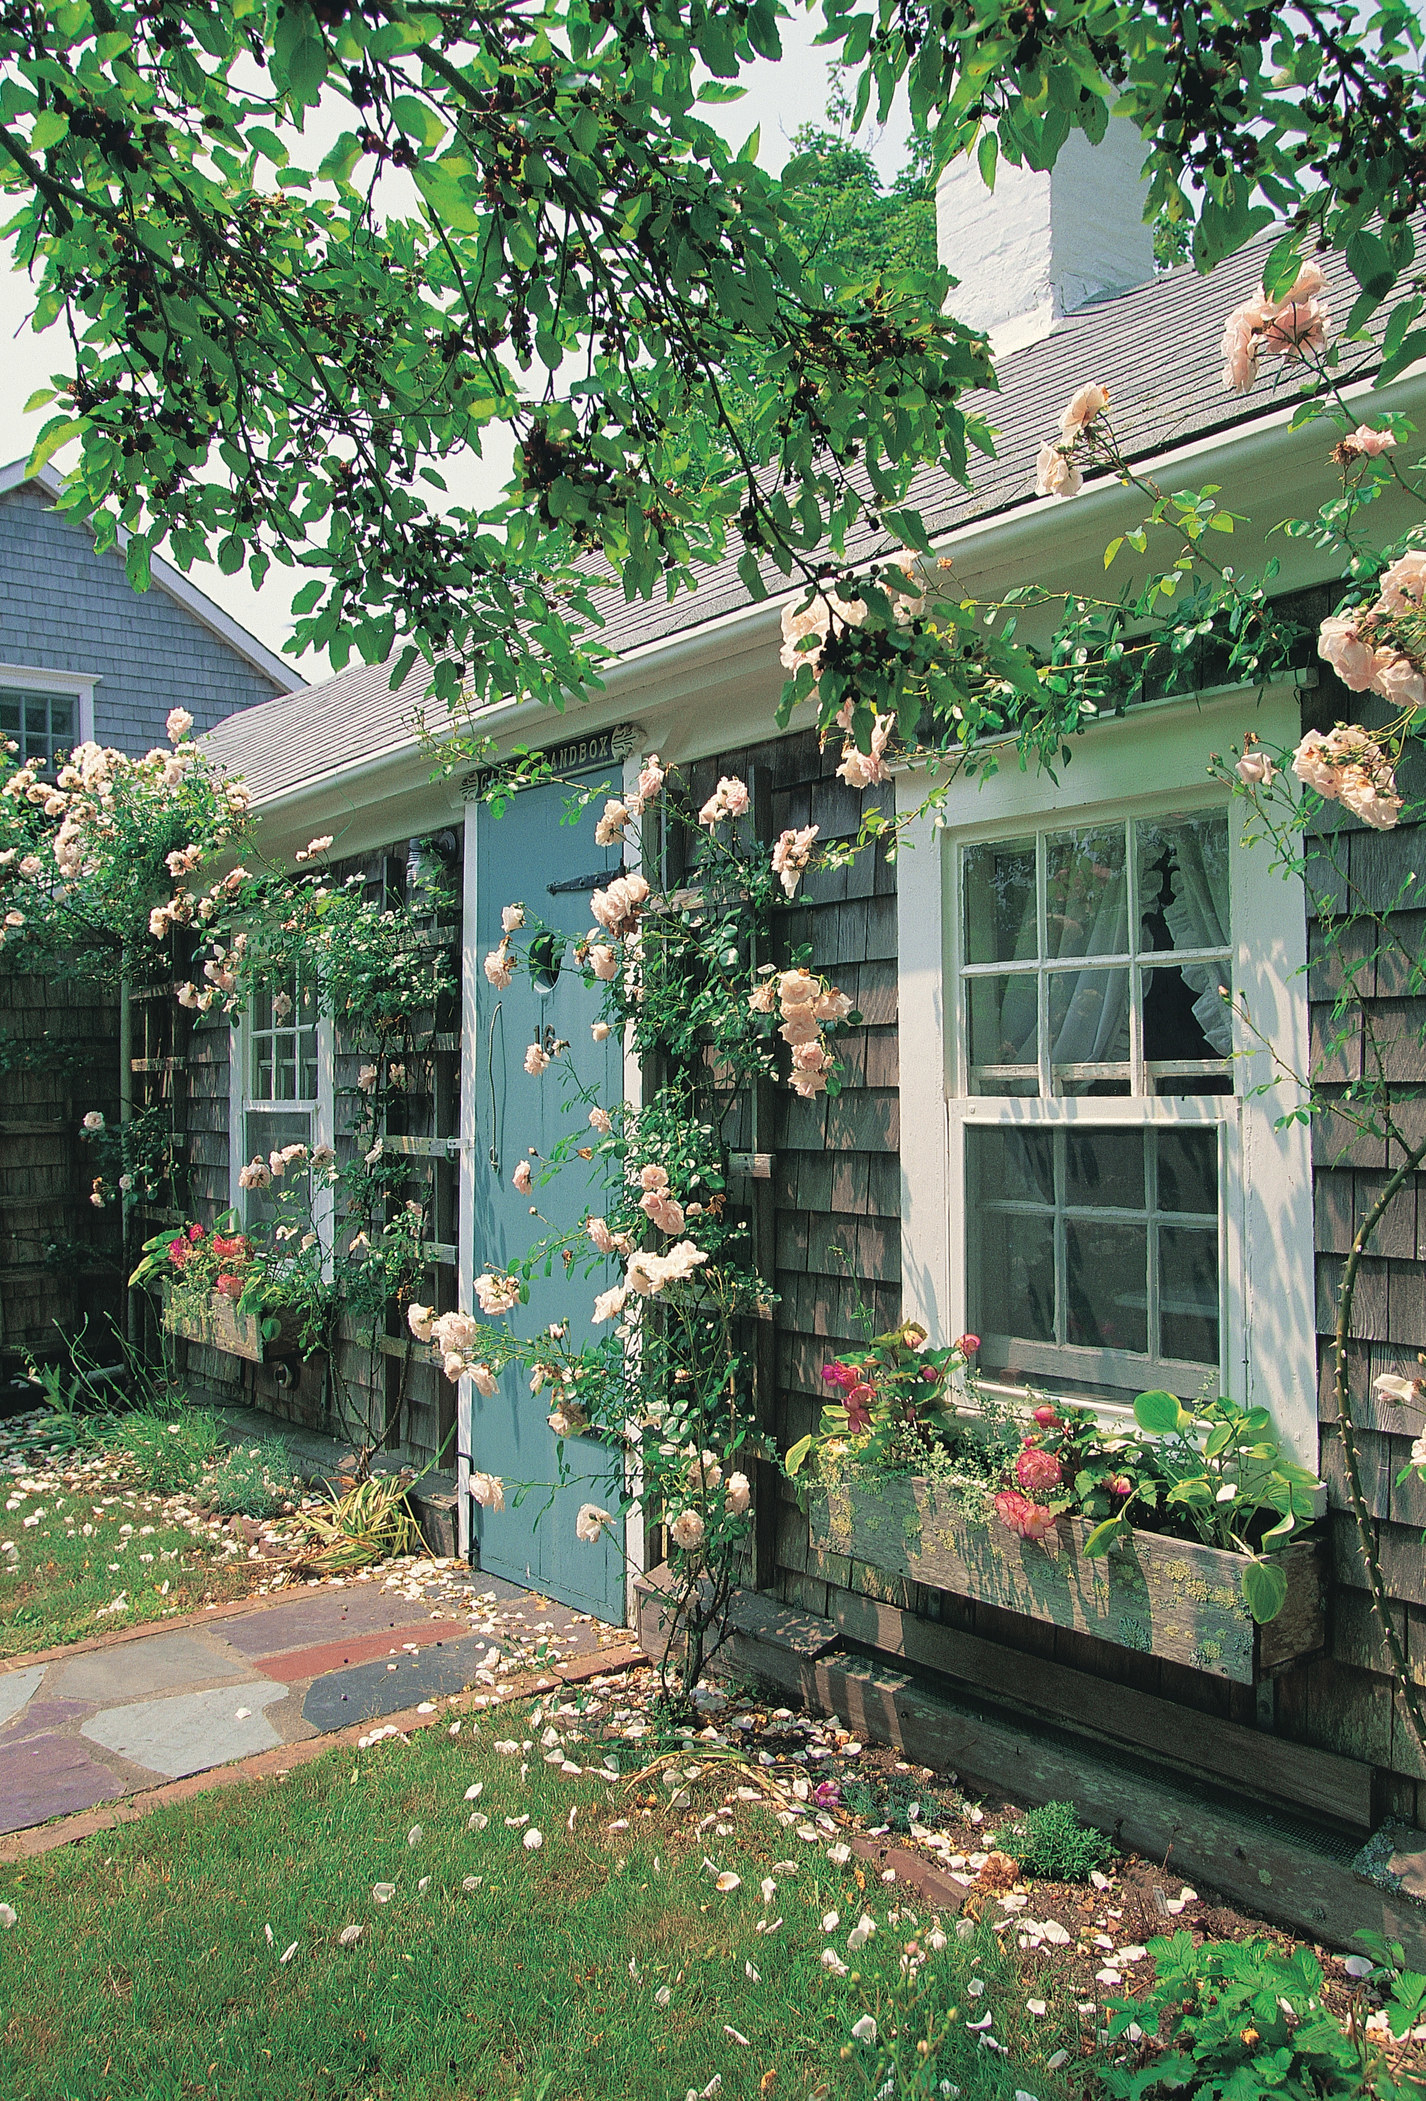 A quaint house covered in flowers in Nantucket